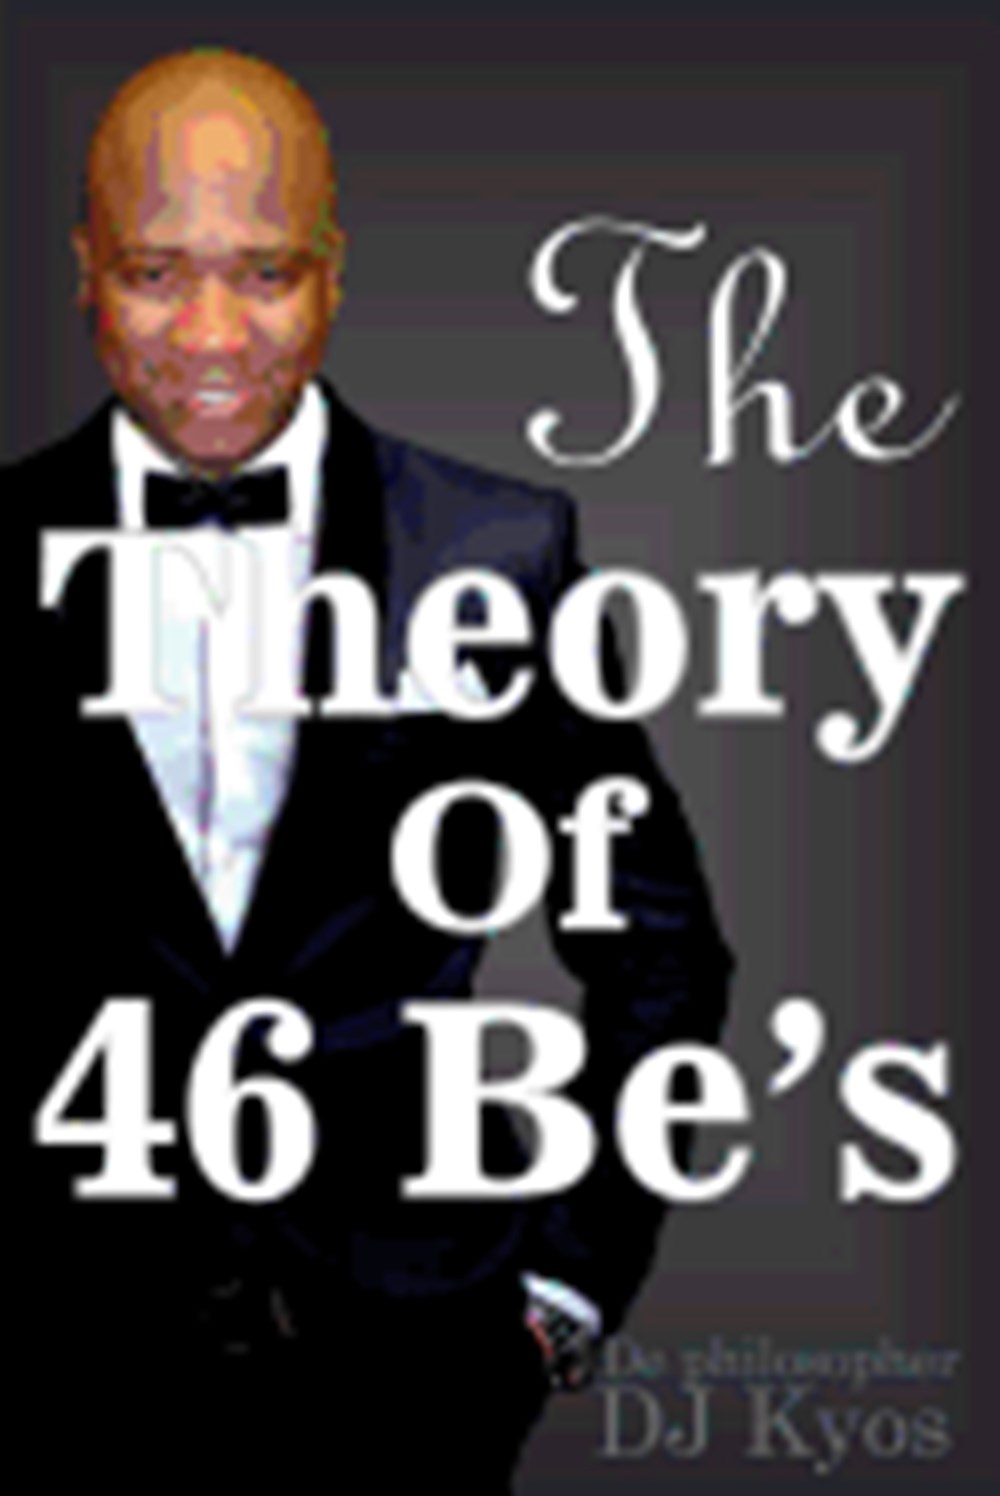 Theory of 46 Be's